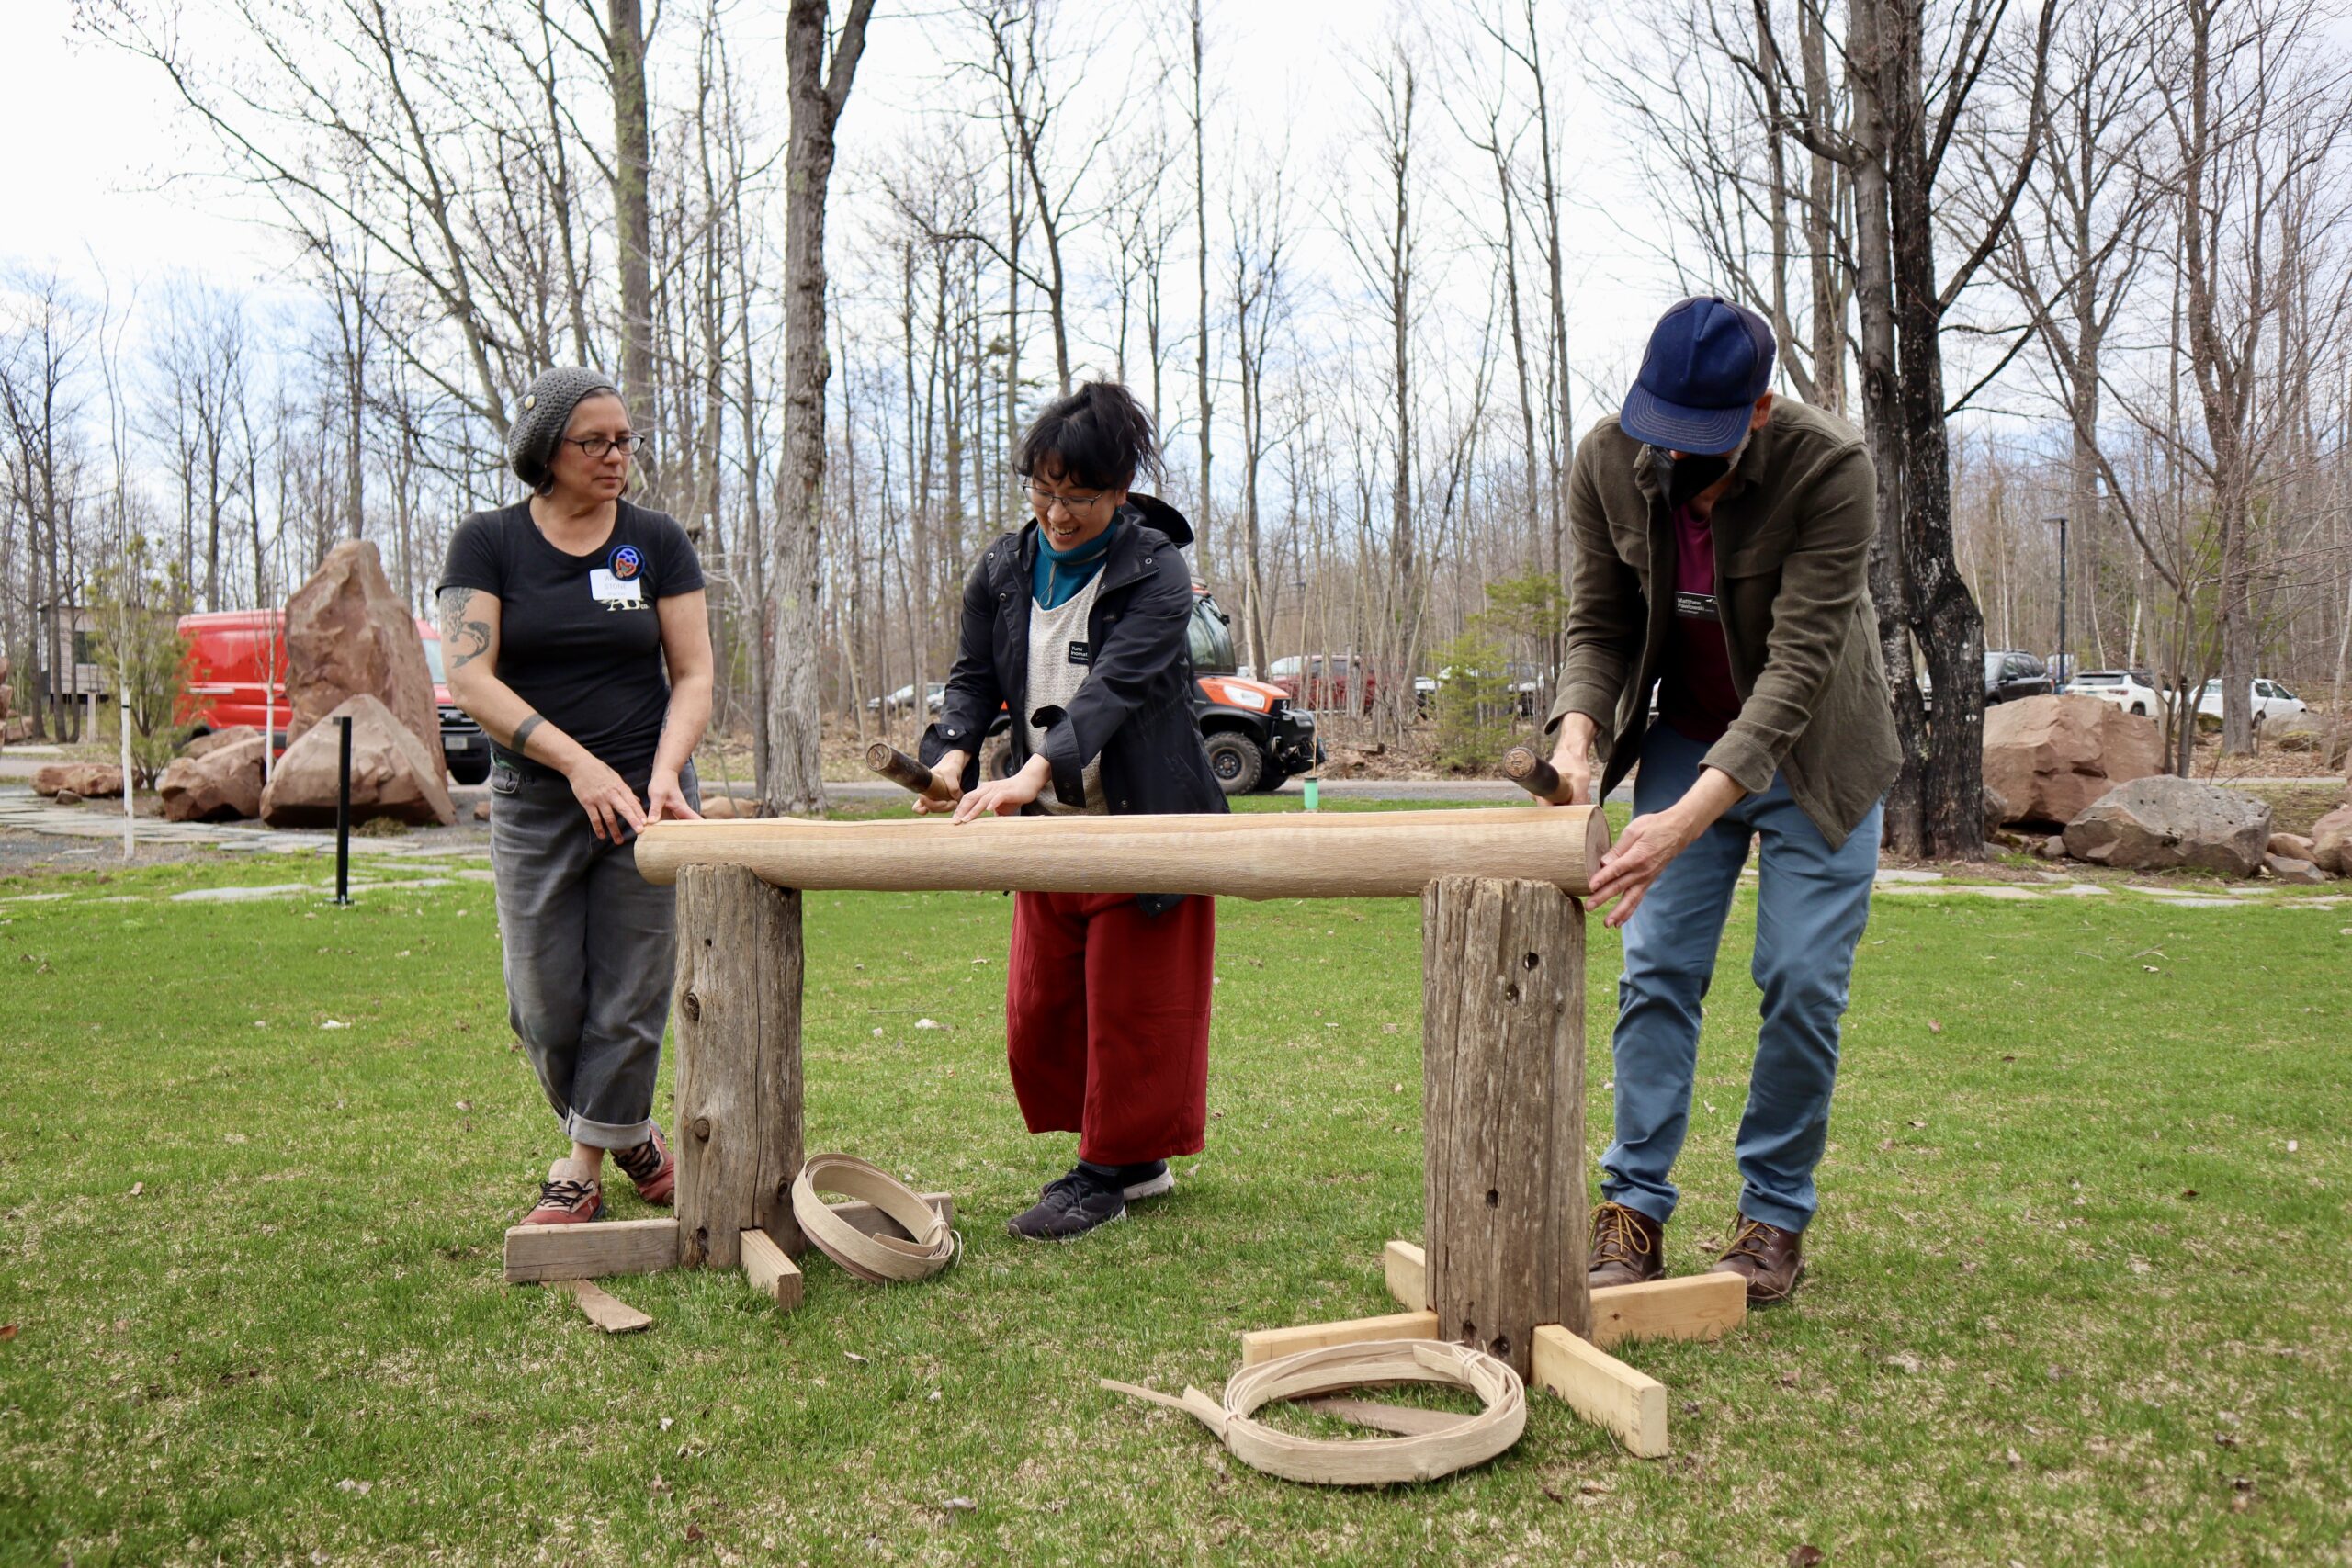 Two people pound a tree to remove a layer of bark for basketmaking as their instructor looks on